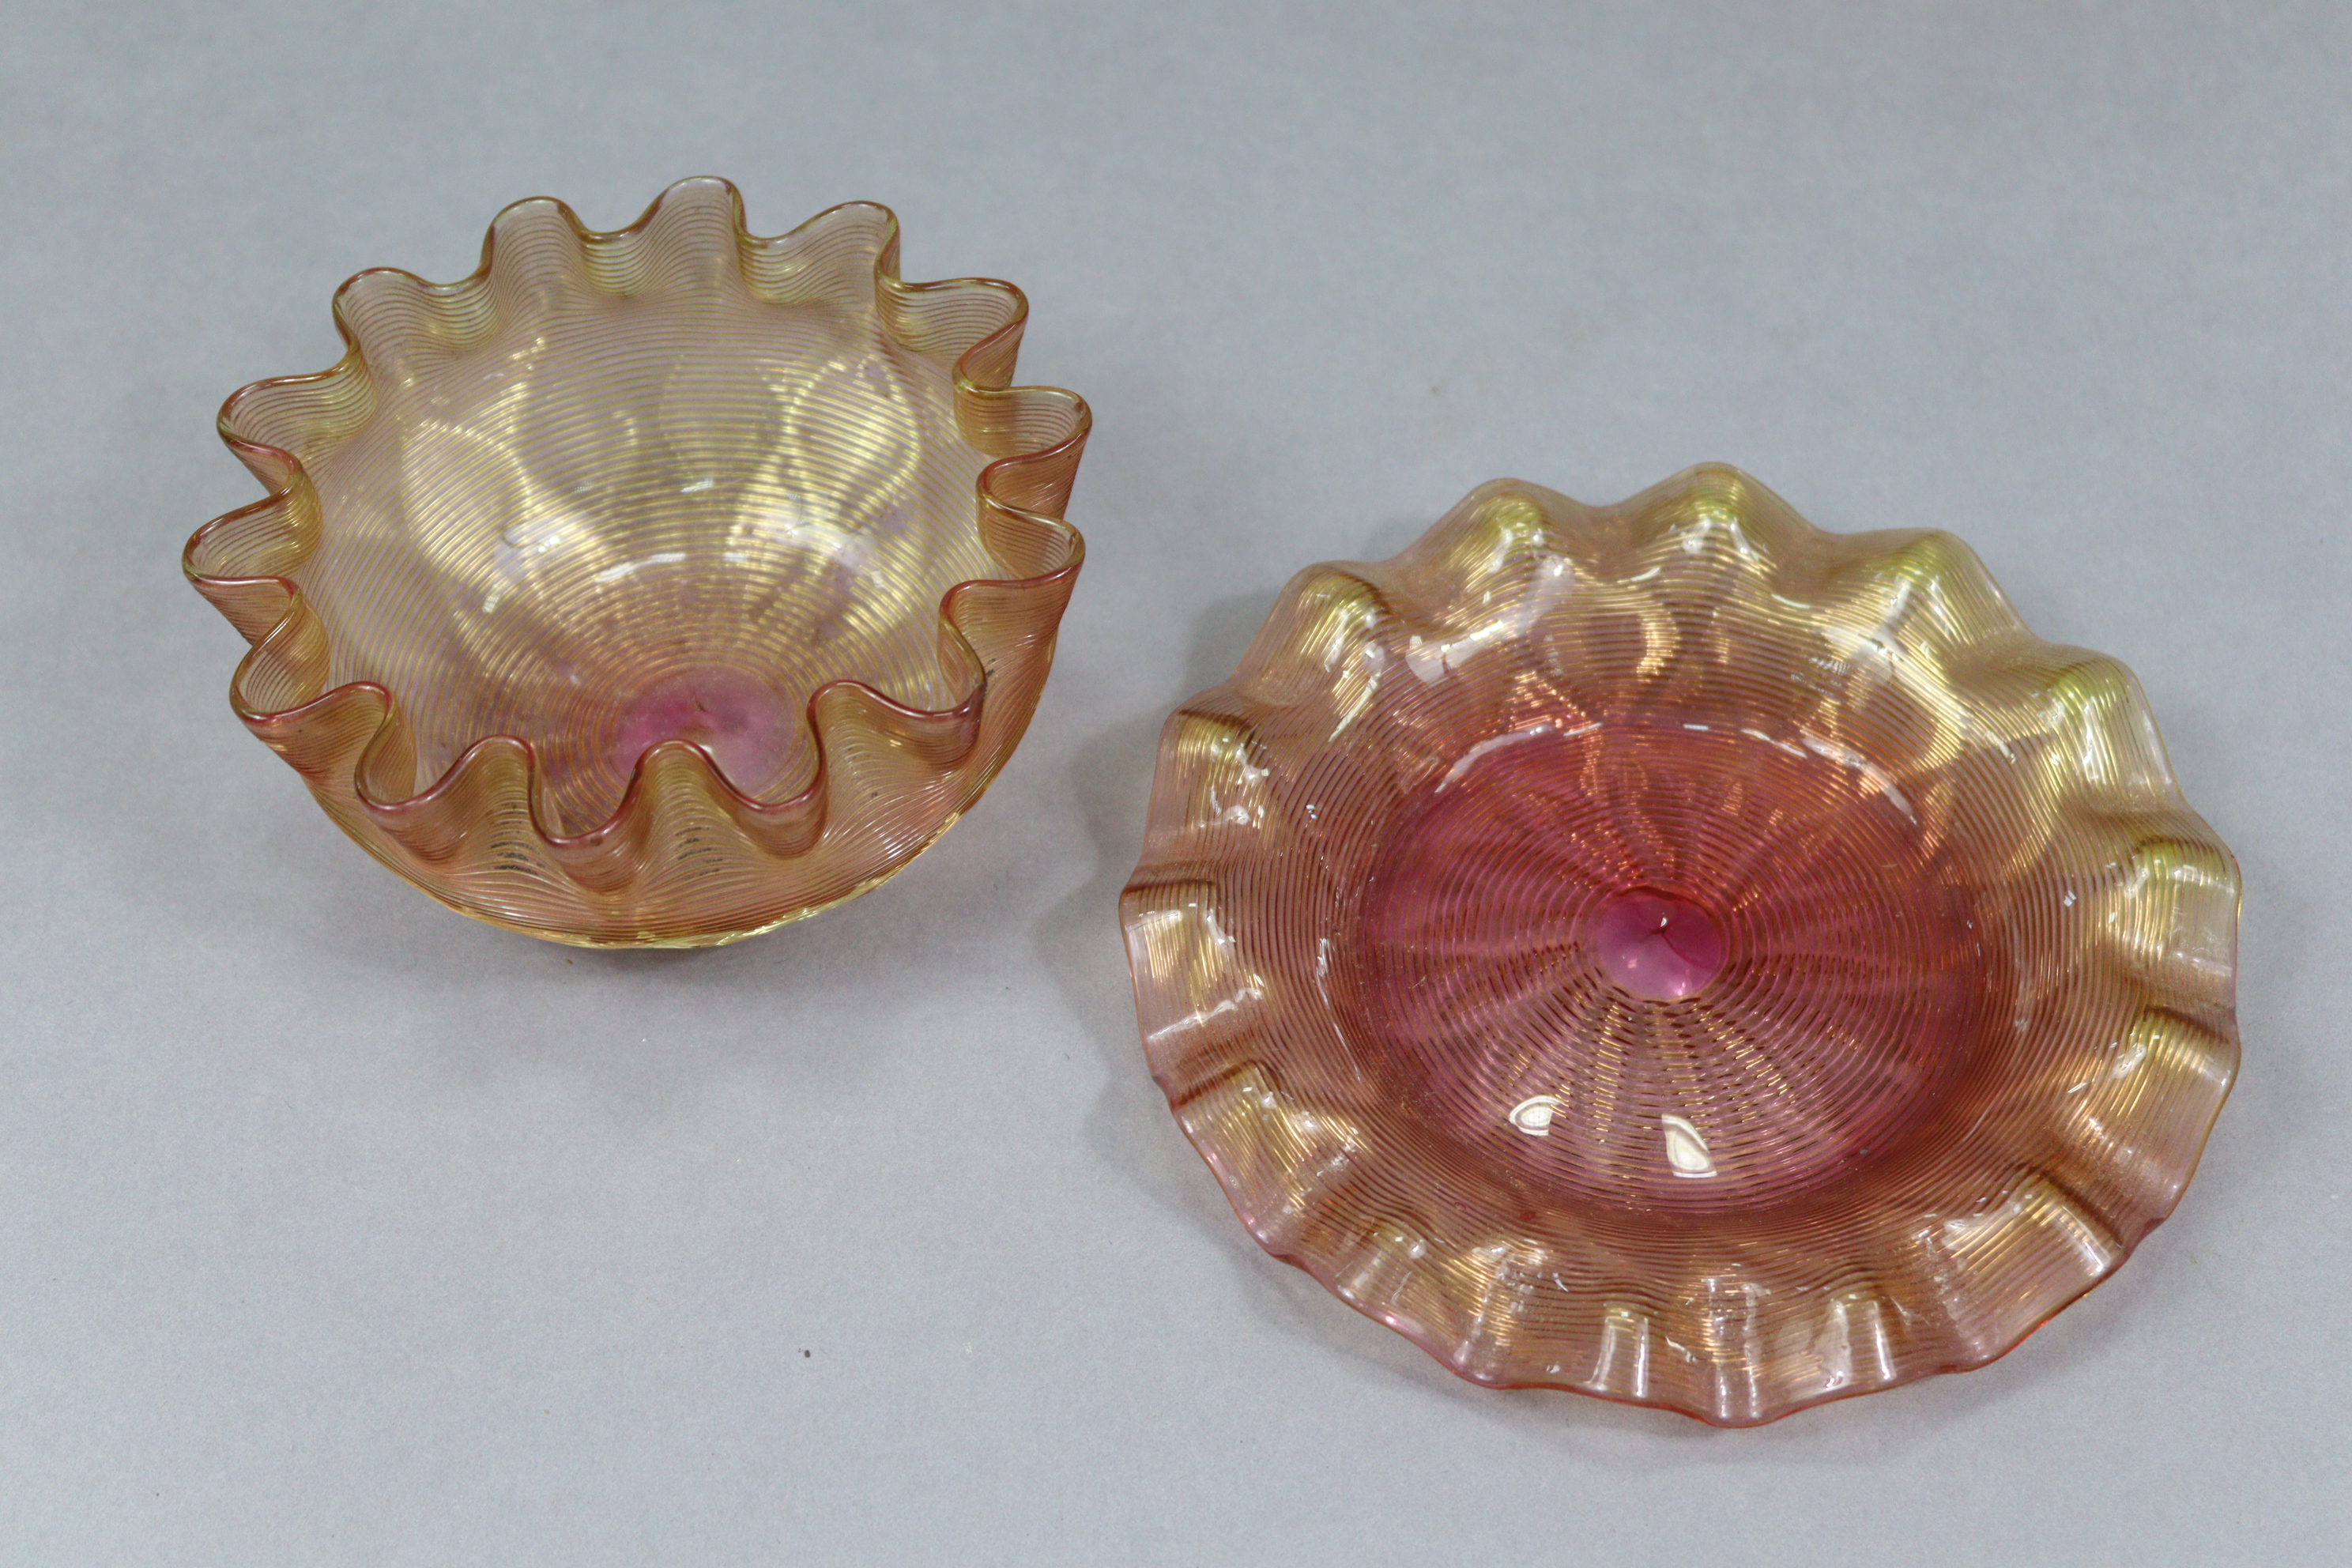 A set of five Venetian glass bowls, 5” diam., each with stand; & a similar smaller bowl. - Image 2 of 3